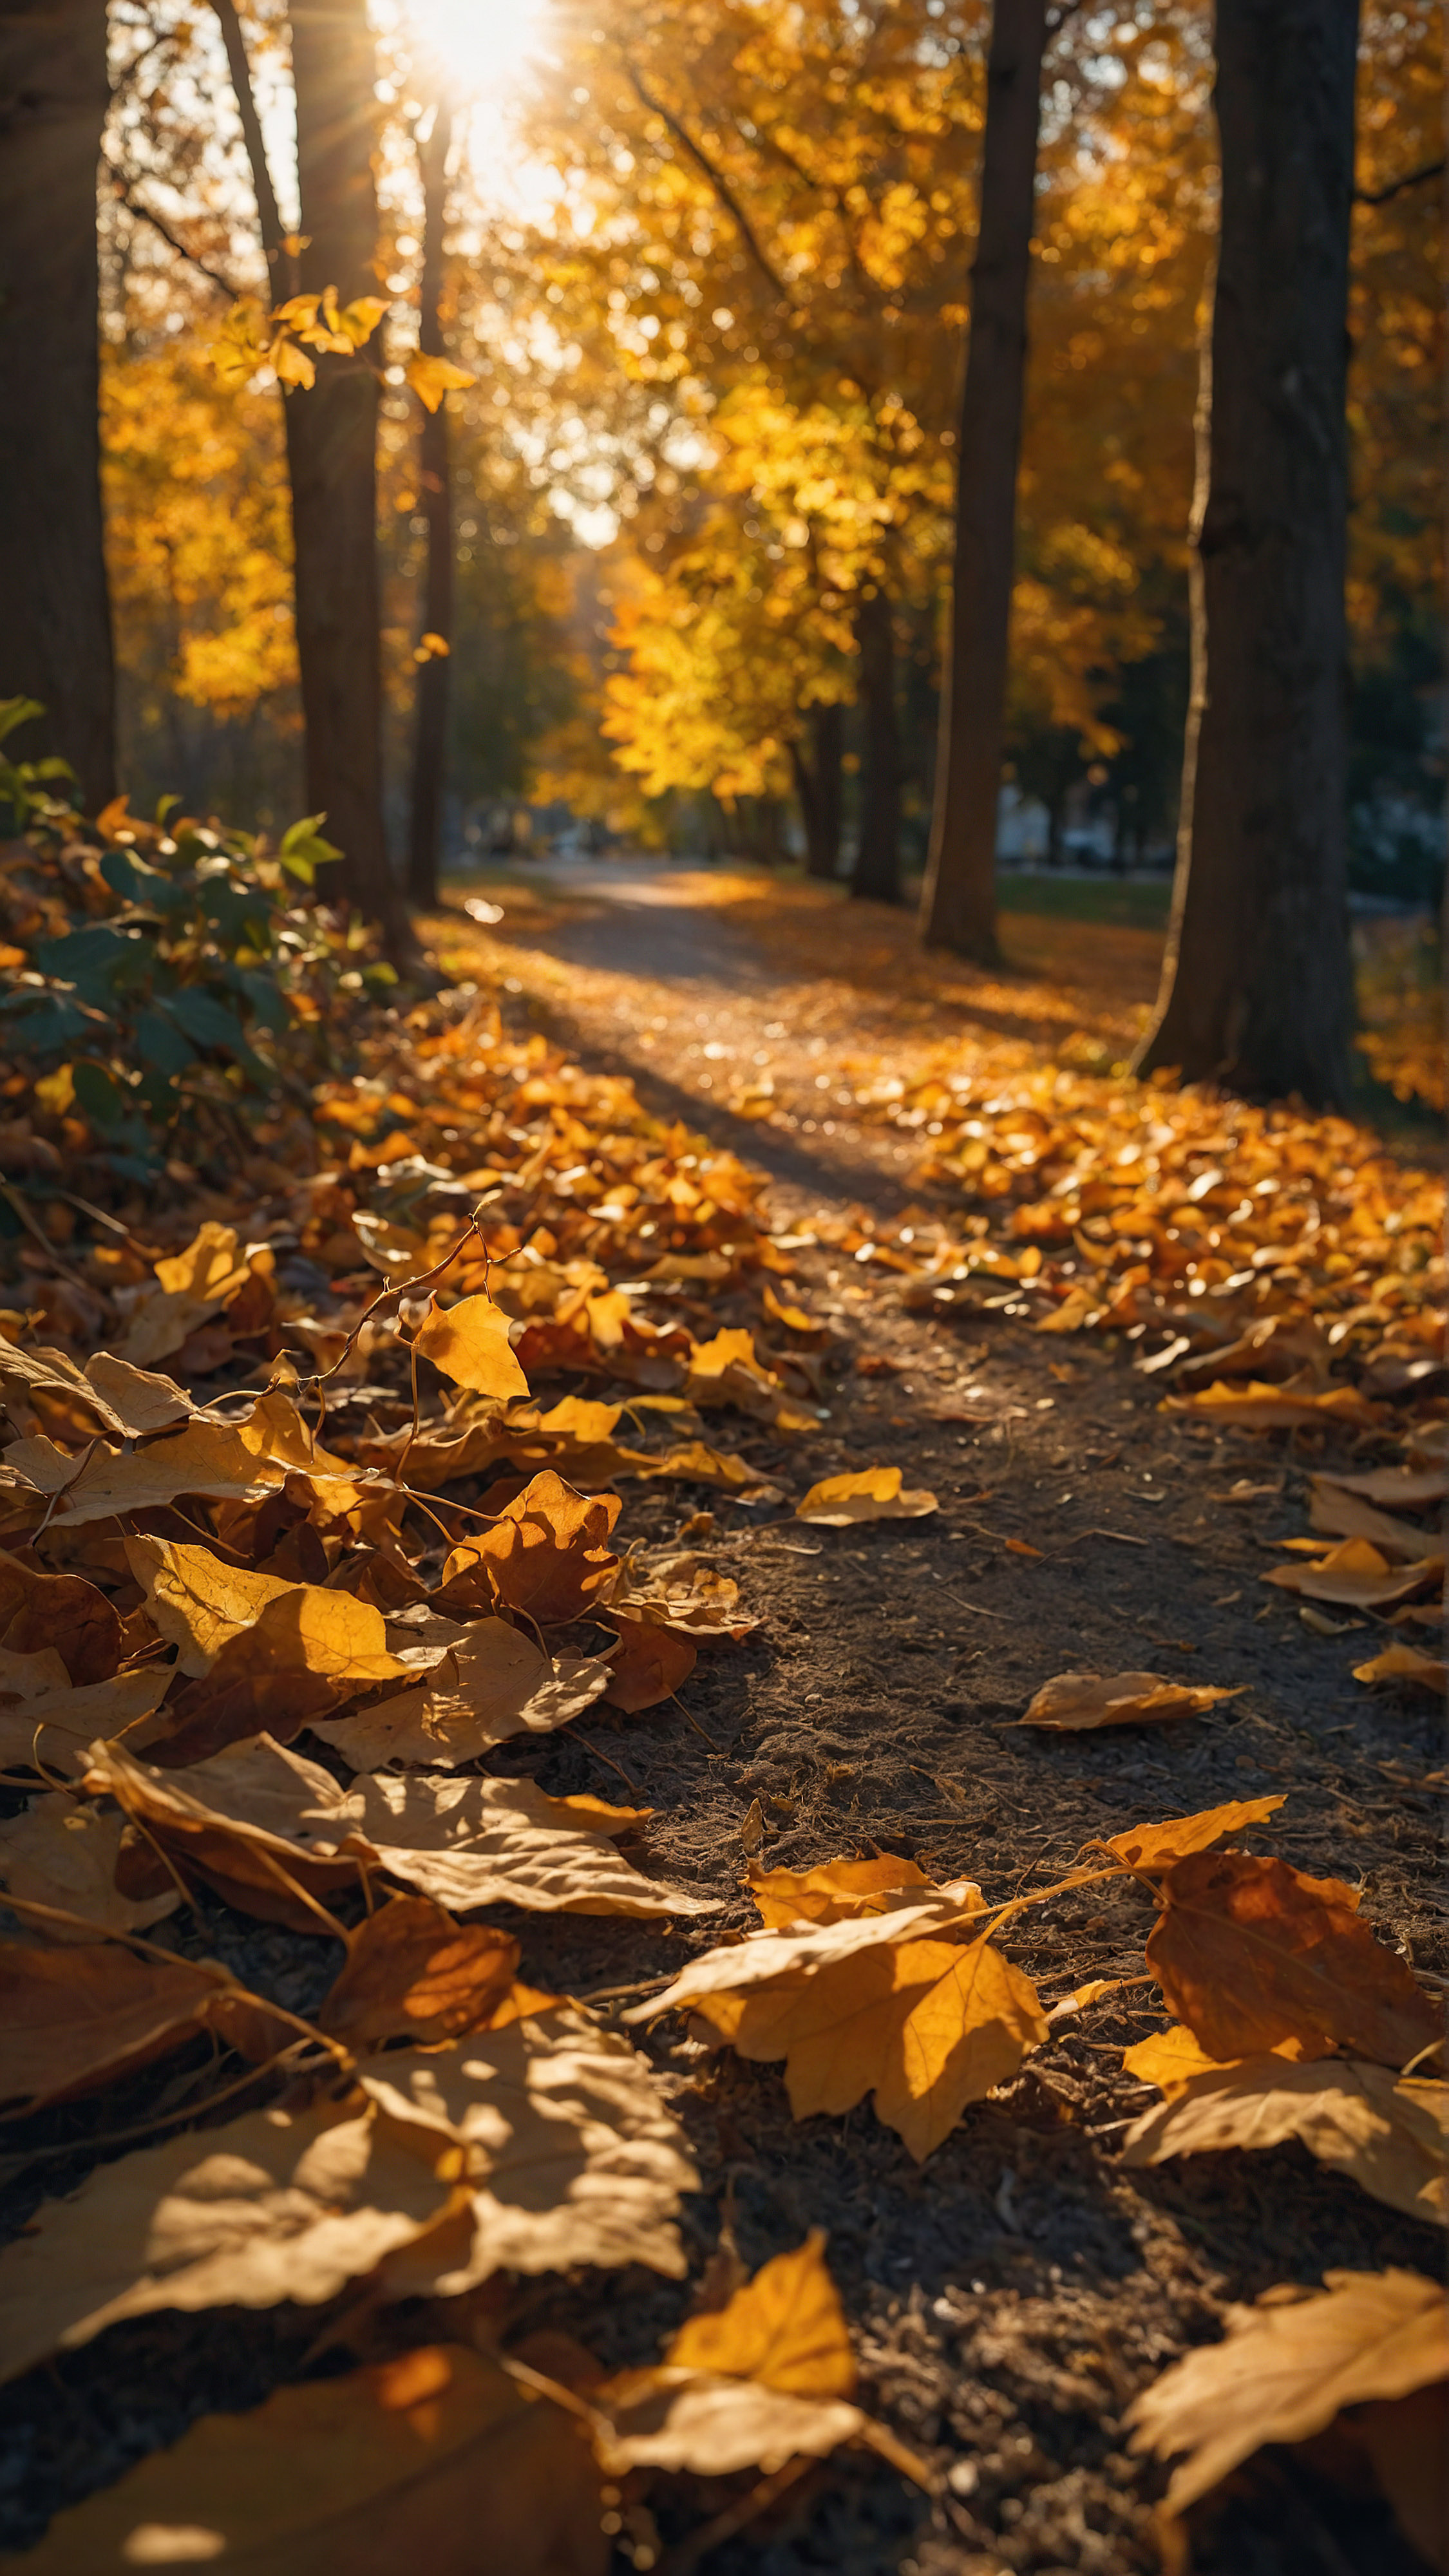 Enjoy the beauty and style of our best 4K iPhone wallpaper, unfolding a serene, picturesque autumn scene with warm golden hues of fallen leaves, sunlight filtering through the leaves casting a soft glow, enhancing the season’s rich colors.